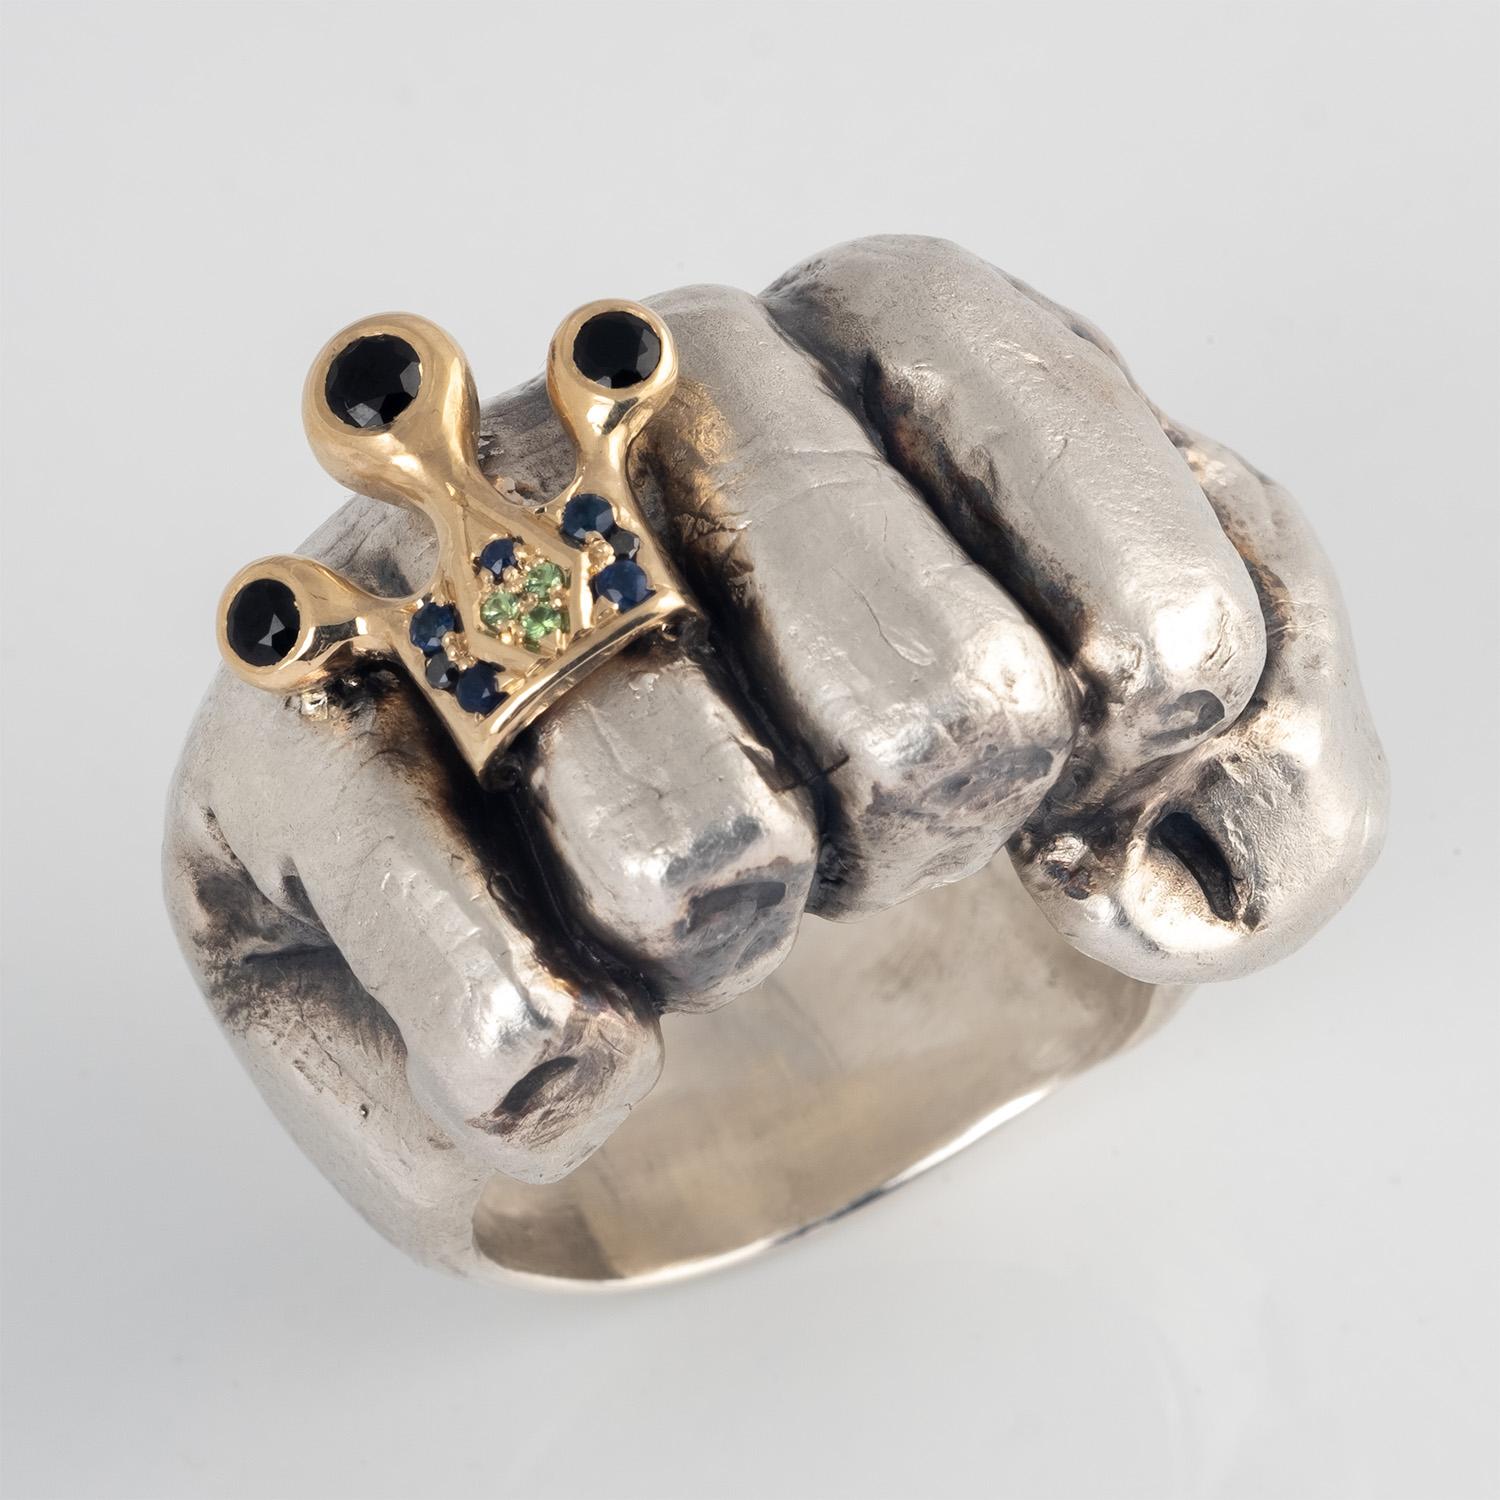 One of a Kind hand carved fist ring featuring a miniature 10 karat yellow gold crown ring. This sculptural ring makes a bold statement and is a wearable work of art.
If you like this ring, check out the companion piece in our collection. Listing